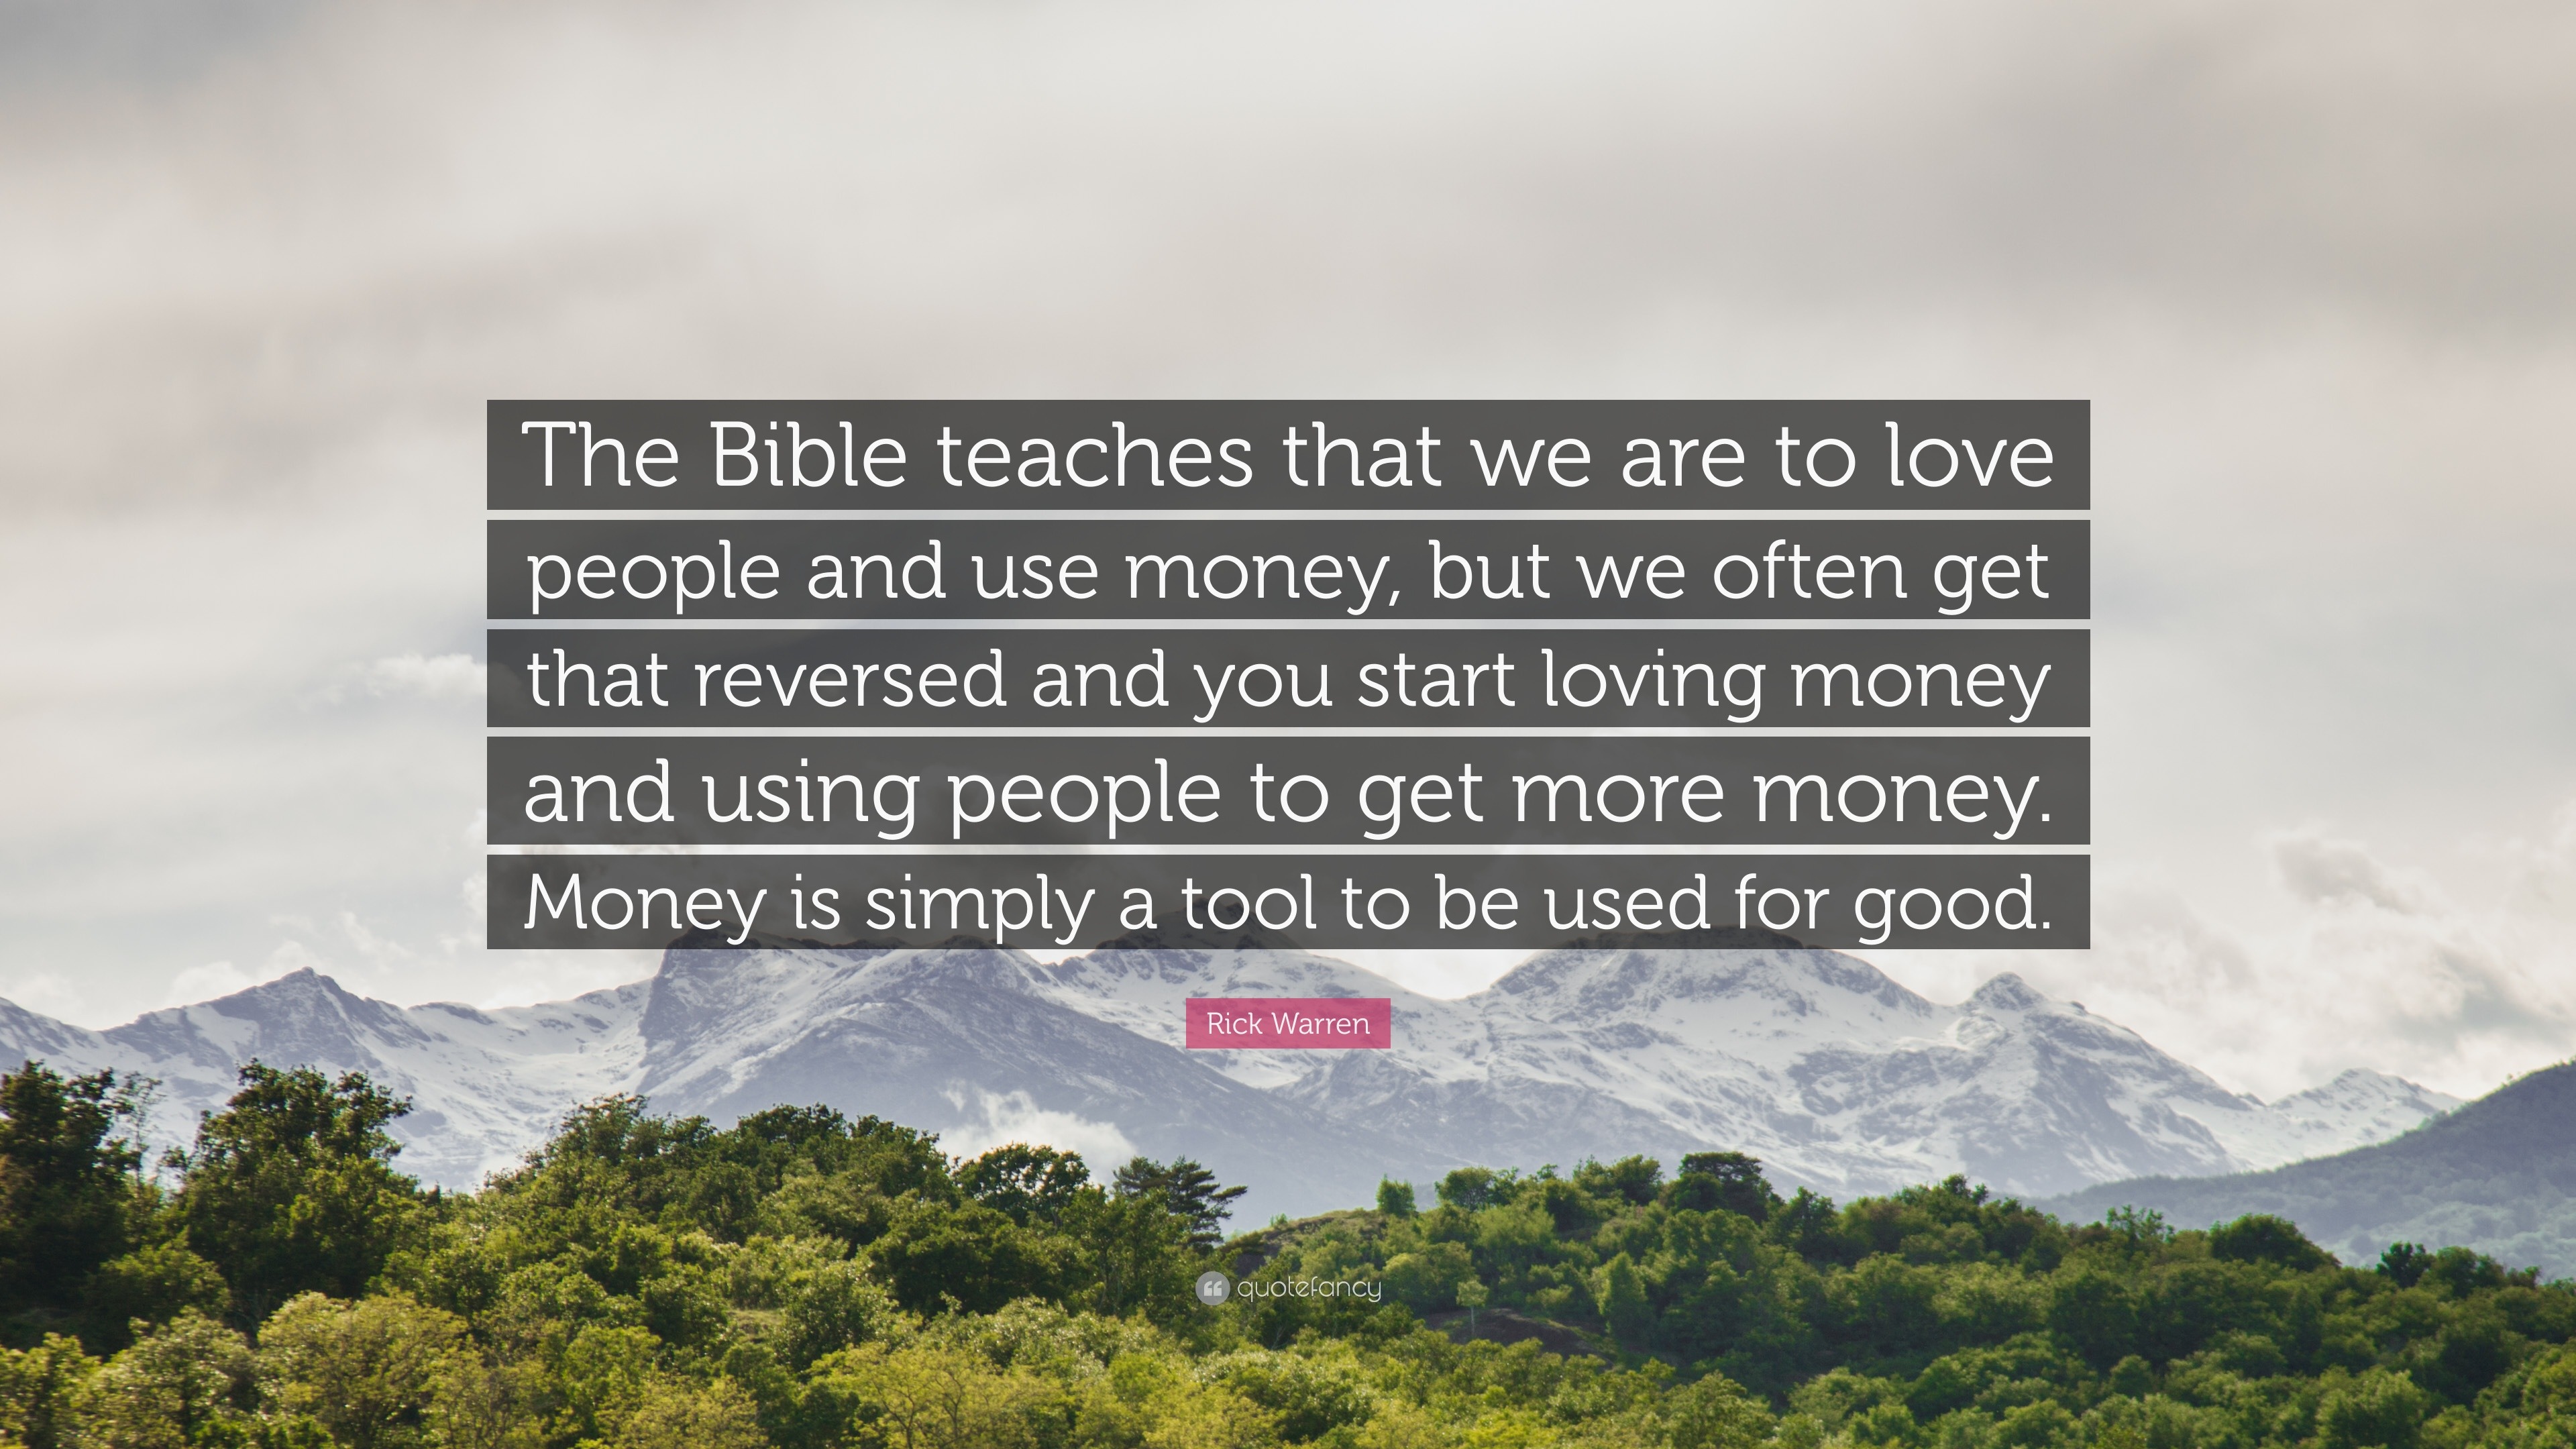 Rick Warren Quote “The Bible teaches that we are to love people and use